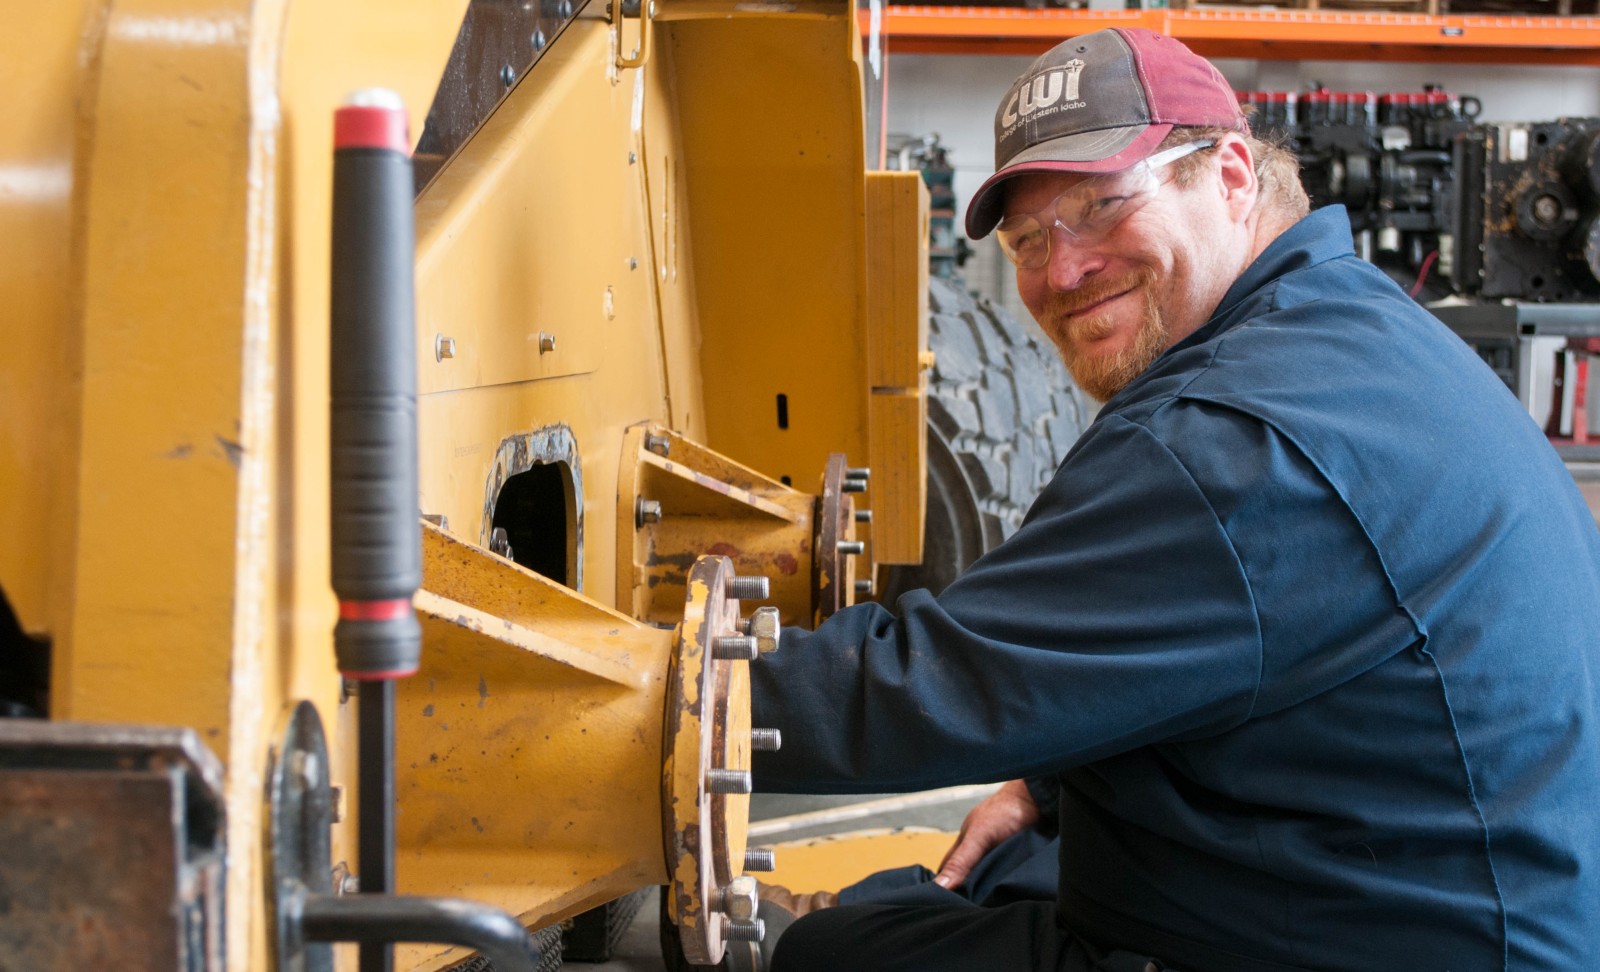 CWI Heavy Equipment student working on a skid steer